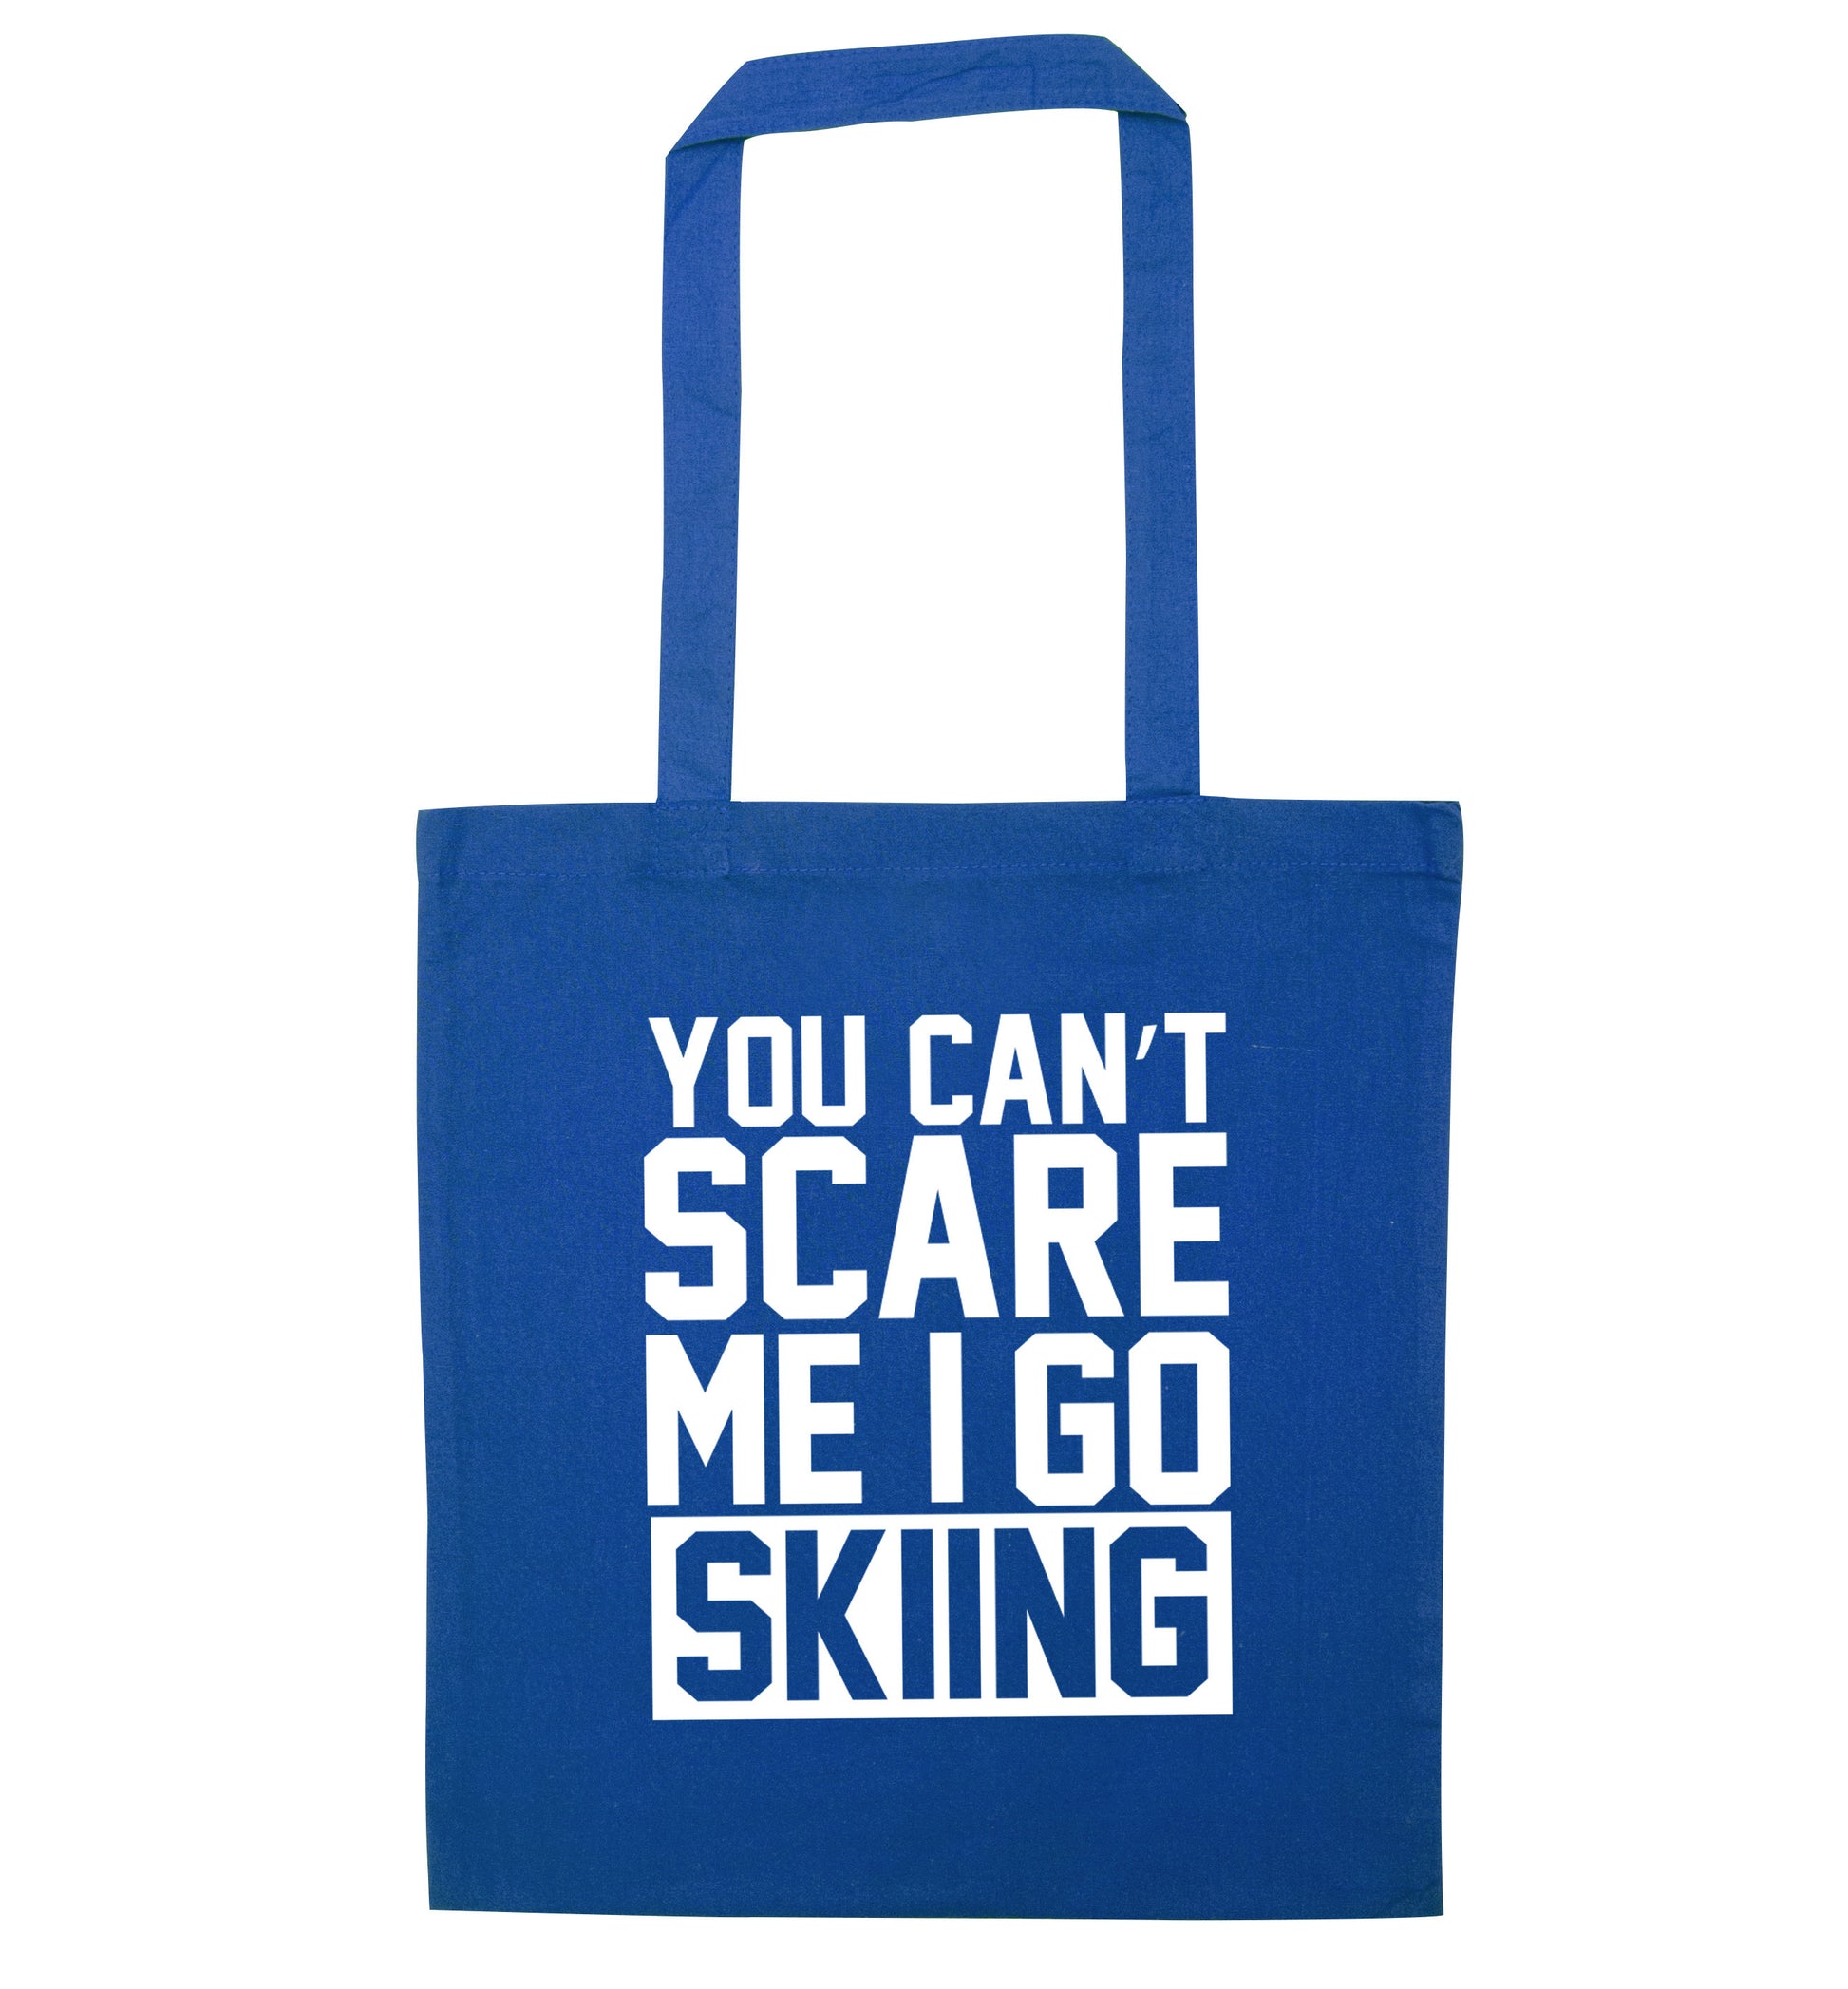 You can't scare me I go skiing blue tote bag